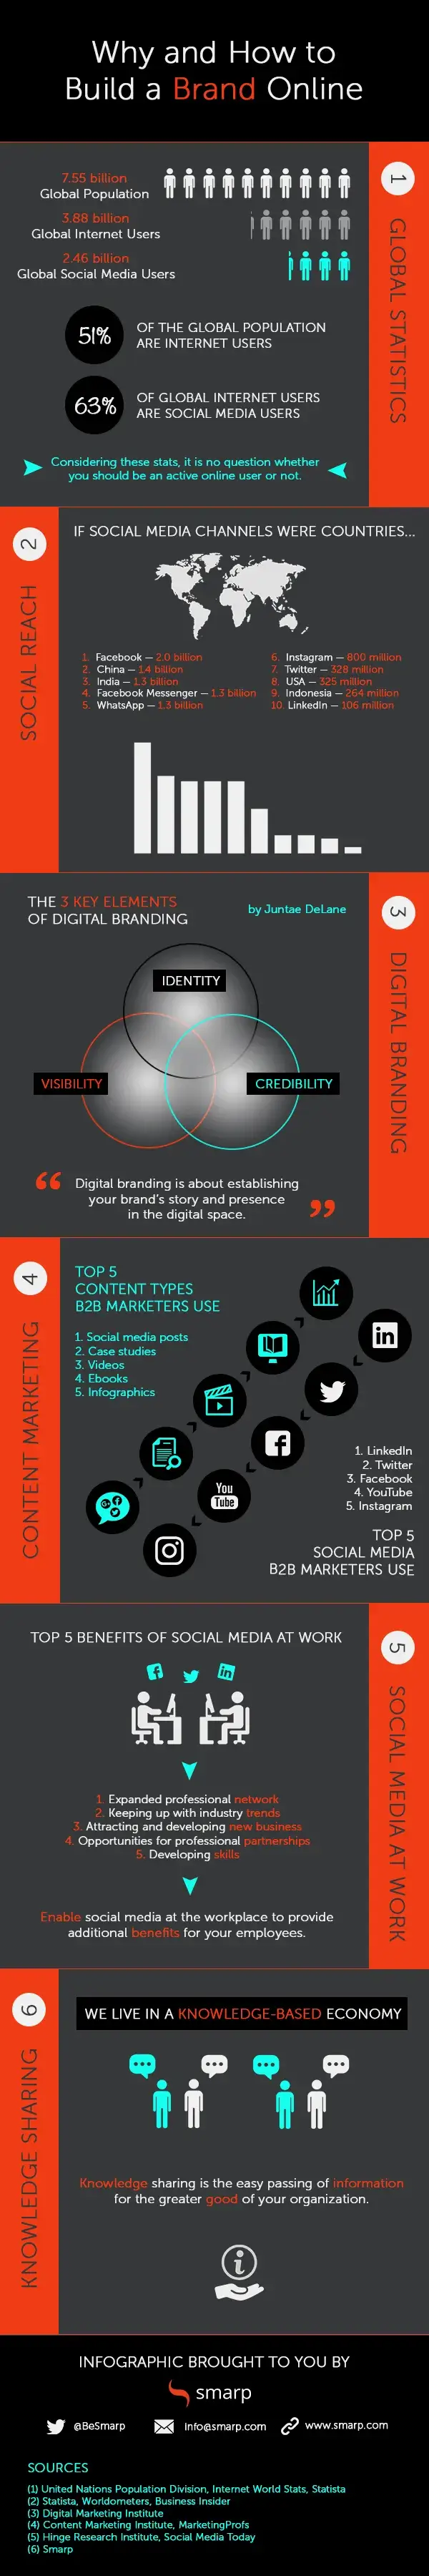 infographic - why and how to build a brand online